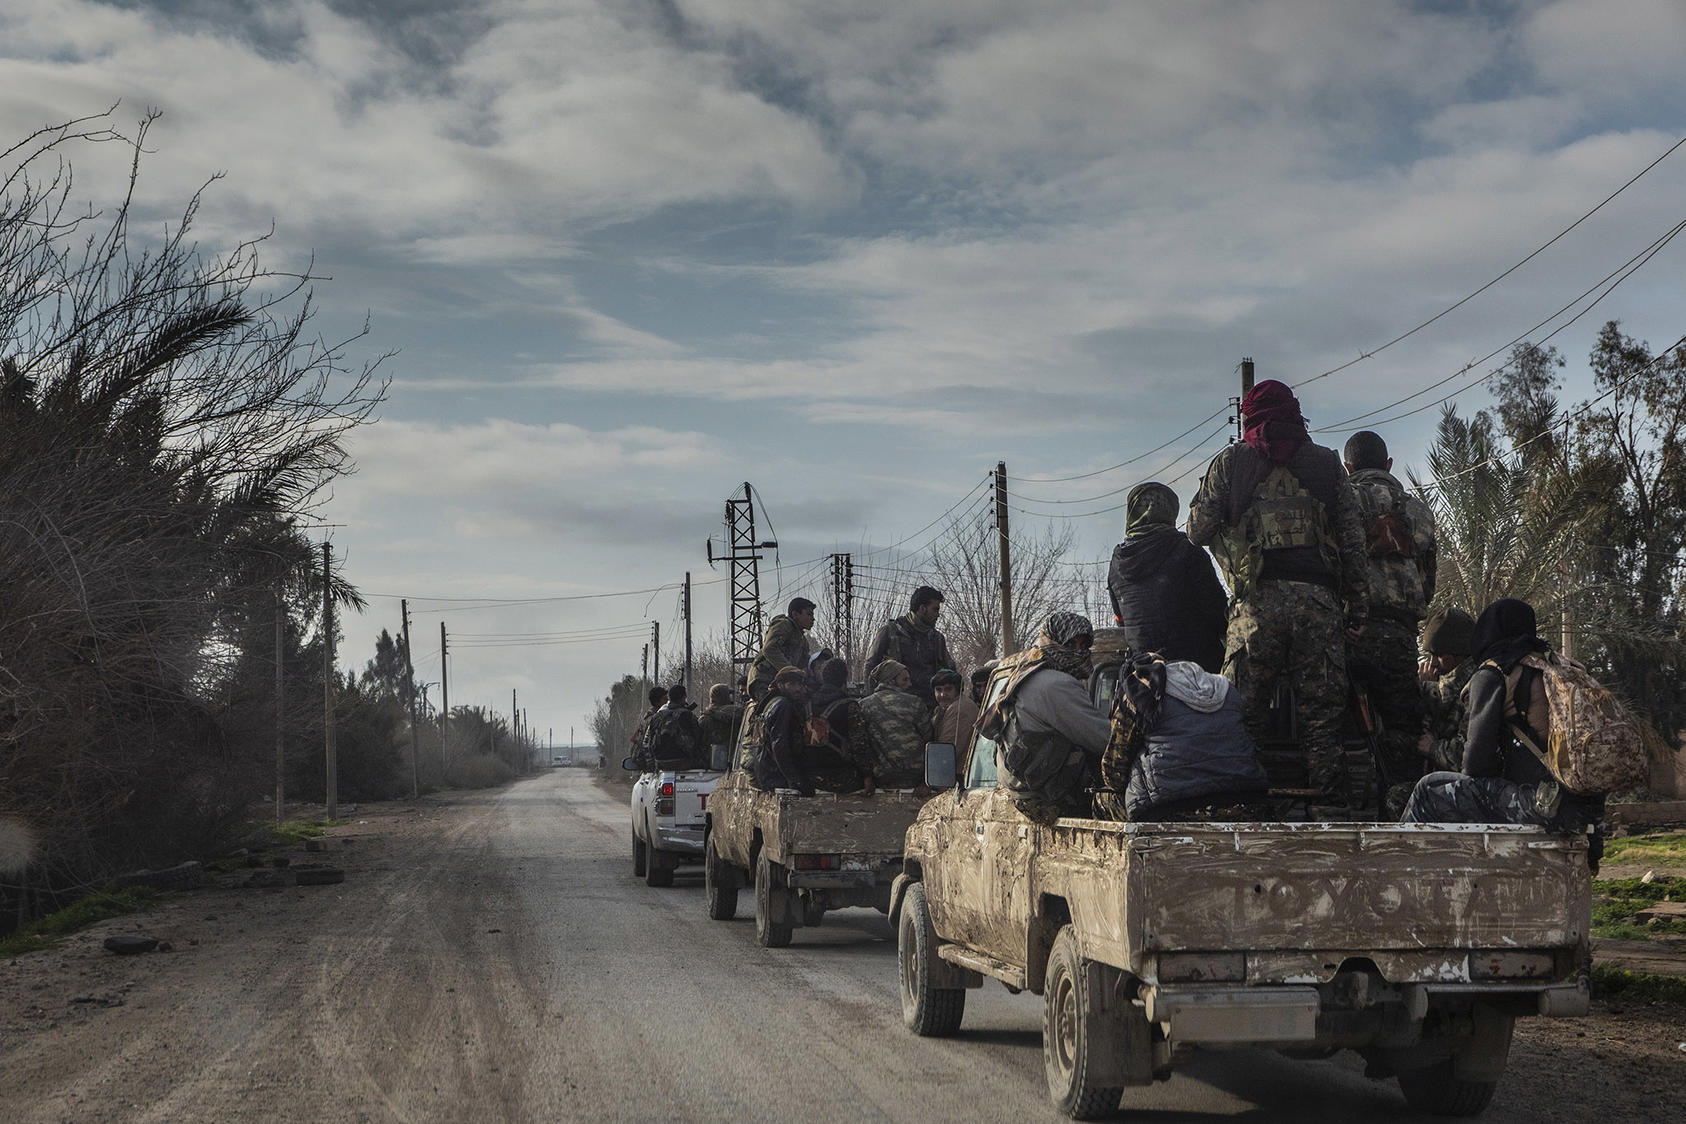 Fighters with the Syrian Democratic Forces head toward the front lines in the village of Baghuz, which was the last area controlled by the Islamic State group in Syria, on Feb. 11, 2019. (Ivor Prickett/The New York Times)